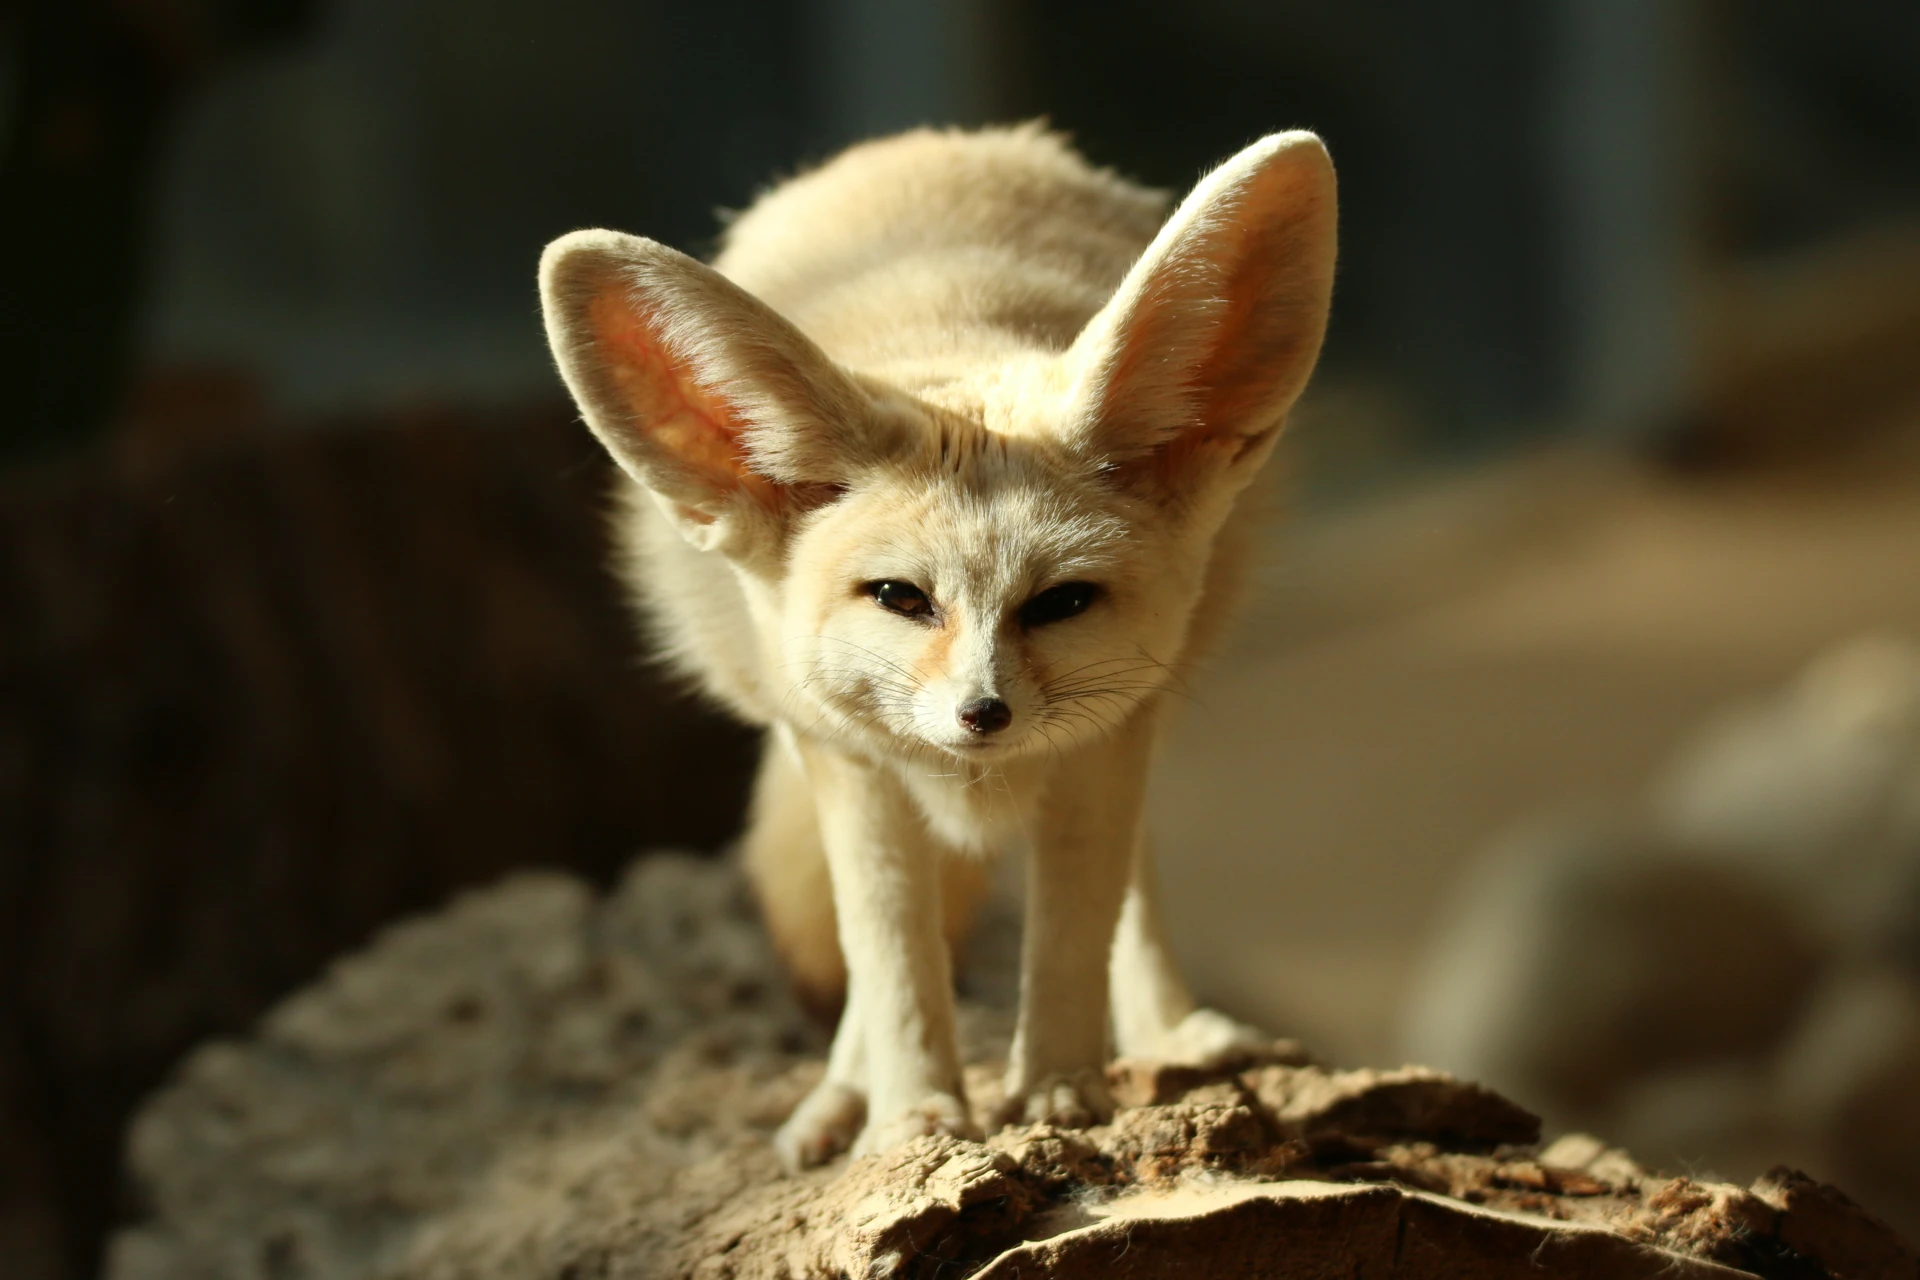 A fennec fox standing on a large tree log and looking directly at the camera.